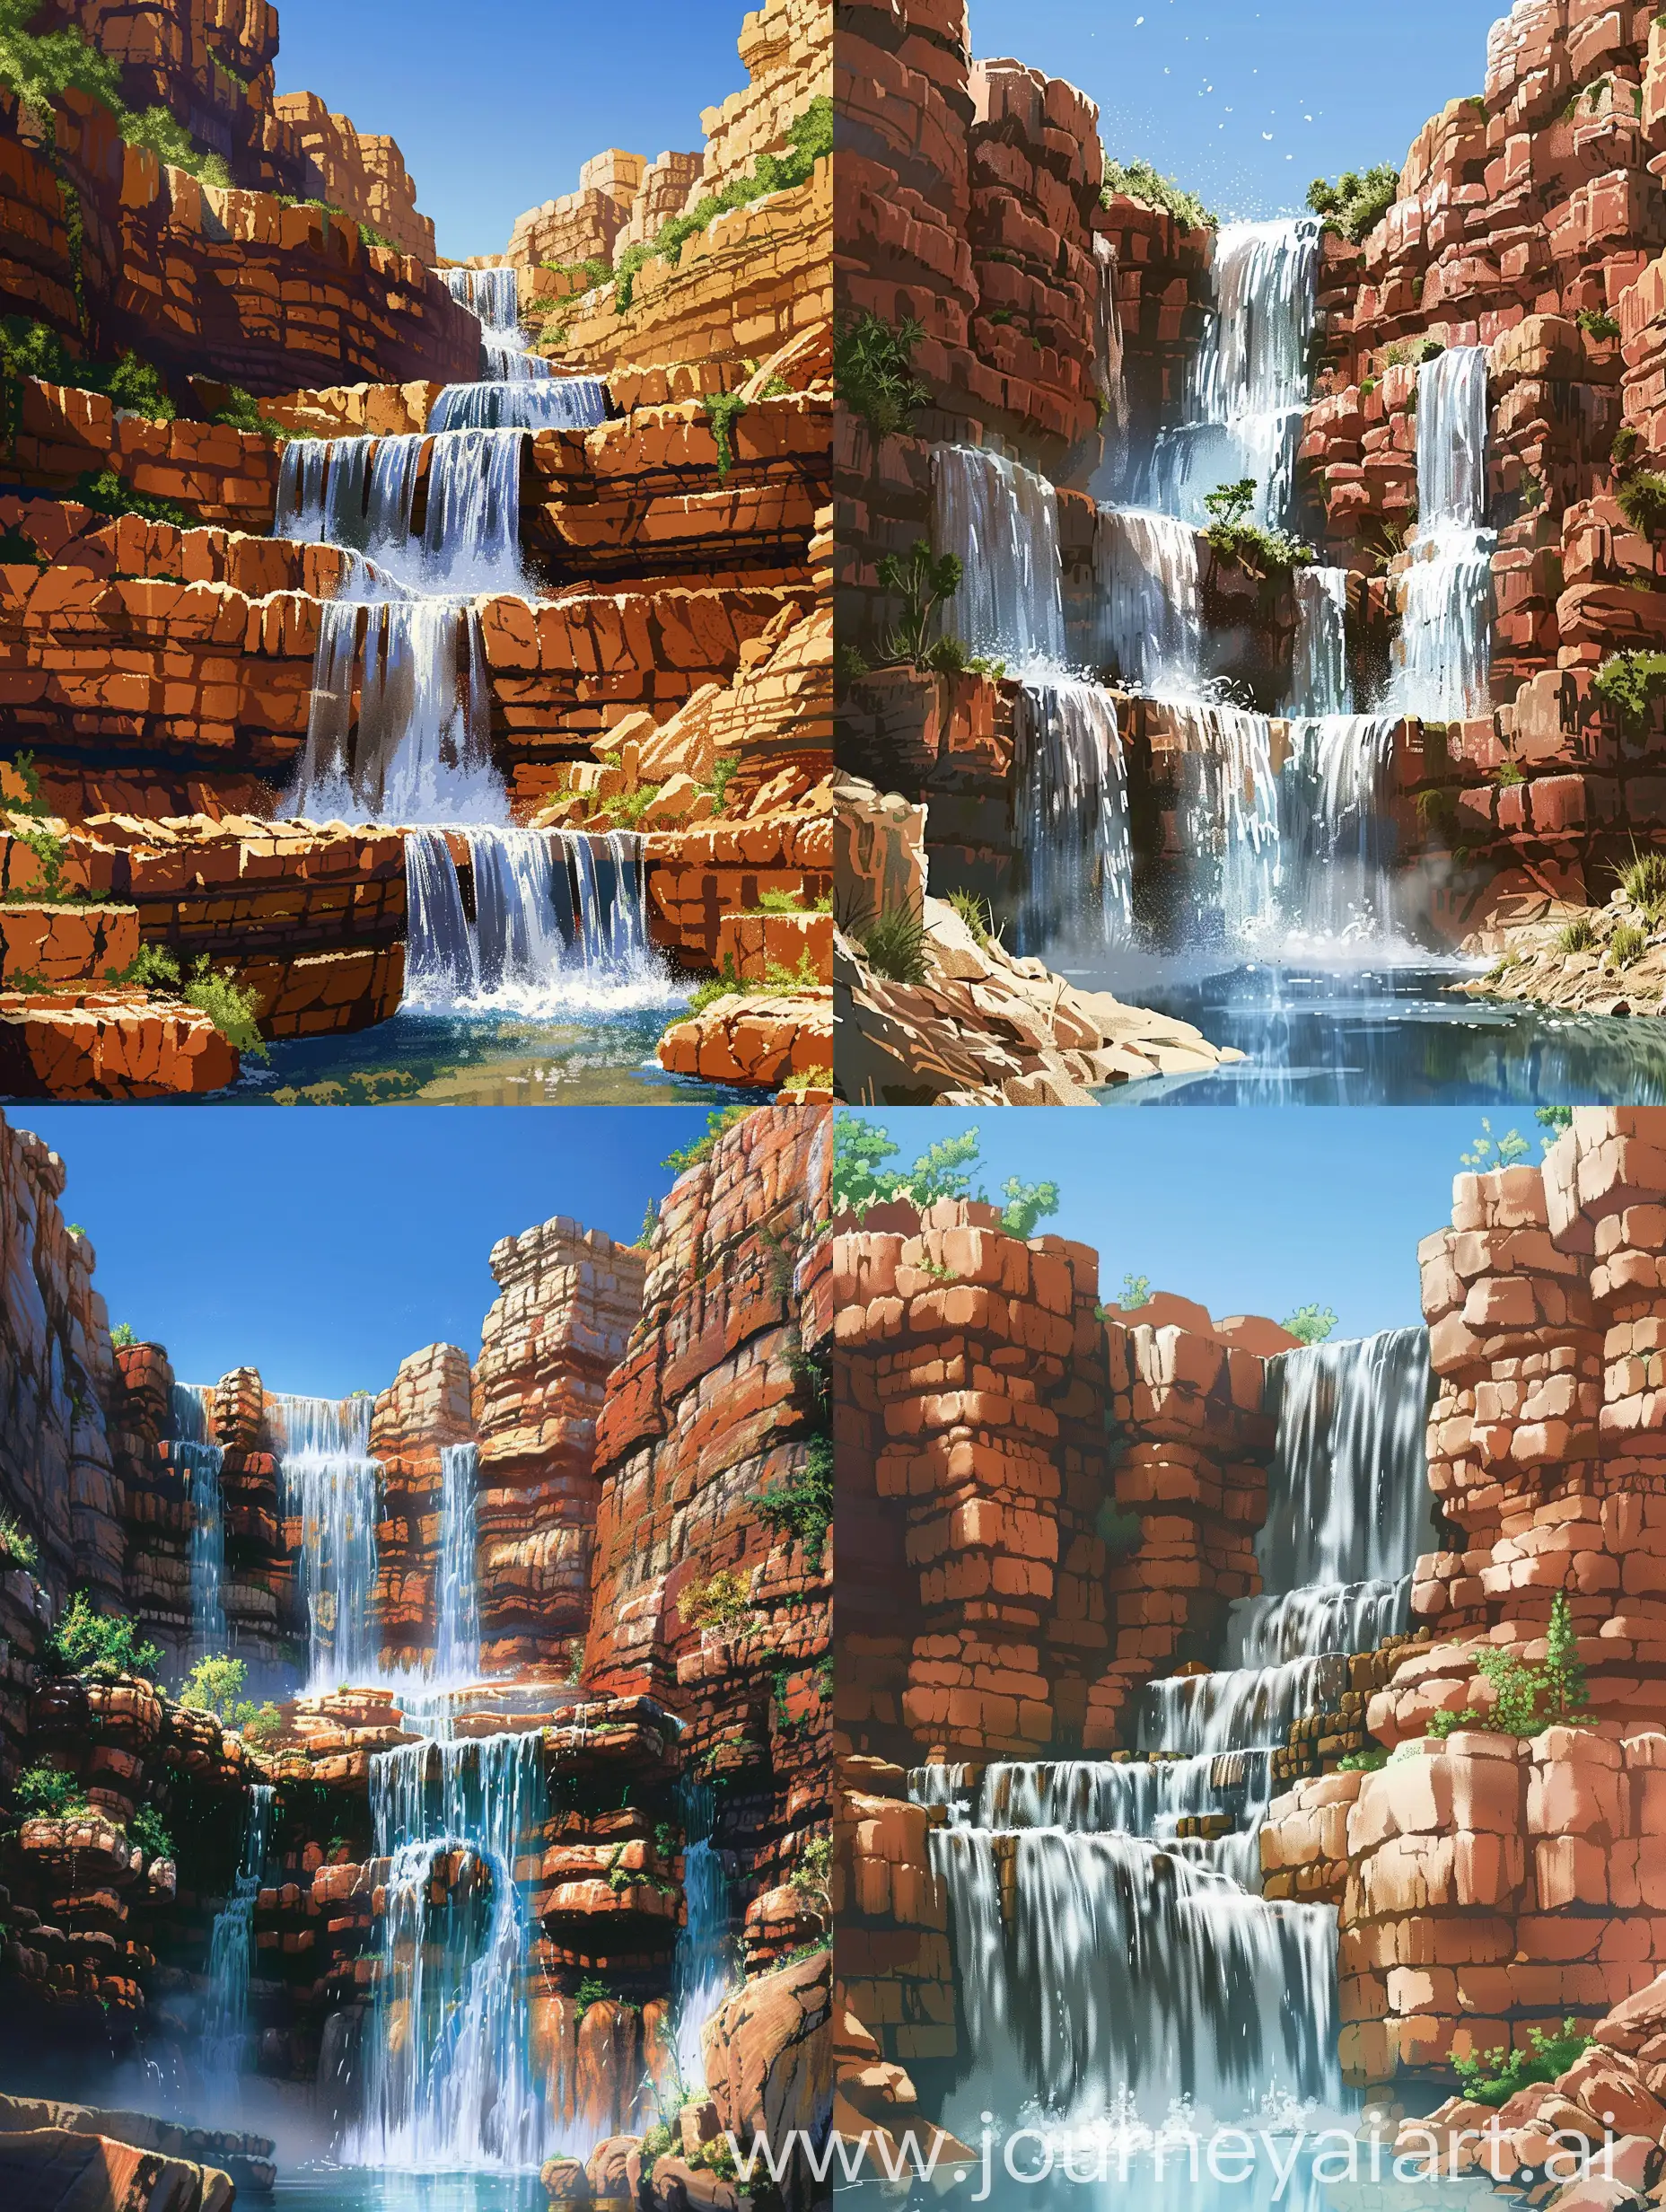 Tranquil-Studio-Ghibli-Style-Waterfall-Landscape-with-Red-Sedimentary-Cliffs